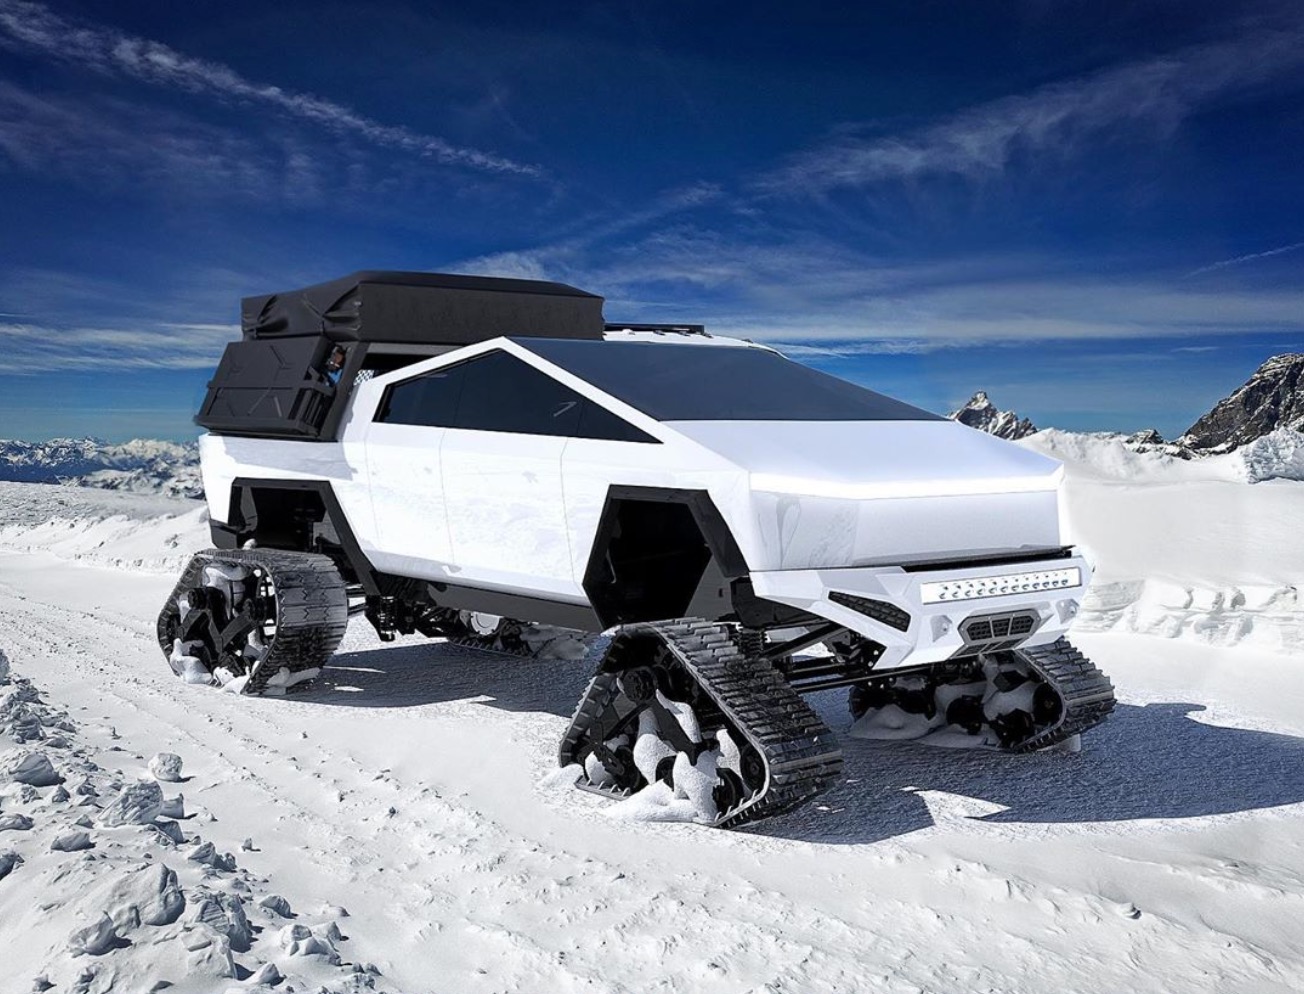 Tesla Cybertruck: Here are some of the coolest mods and attachments - Electrek